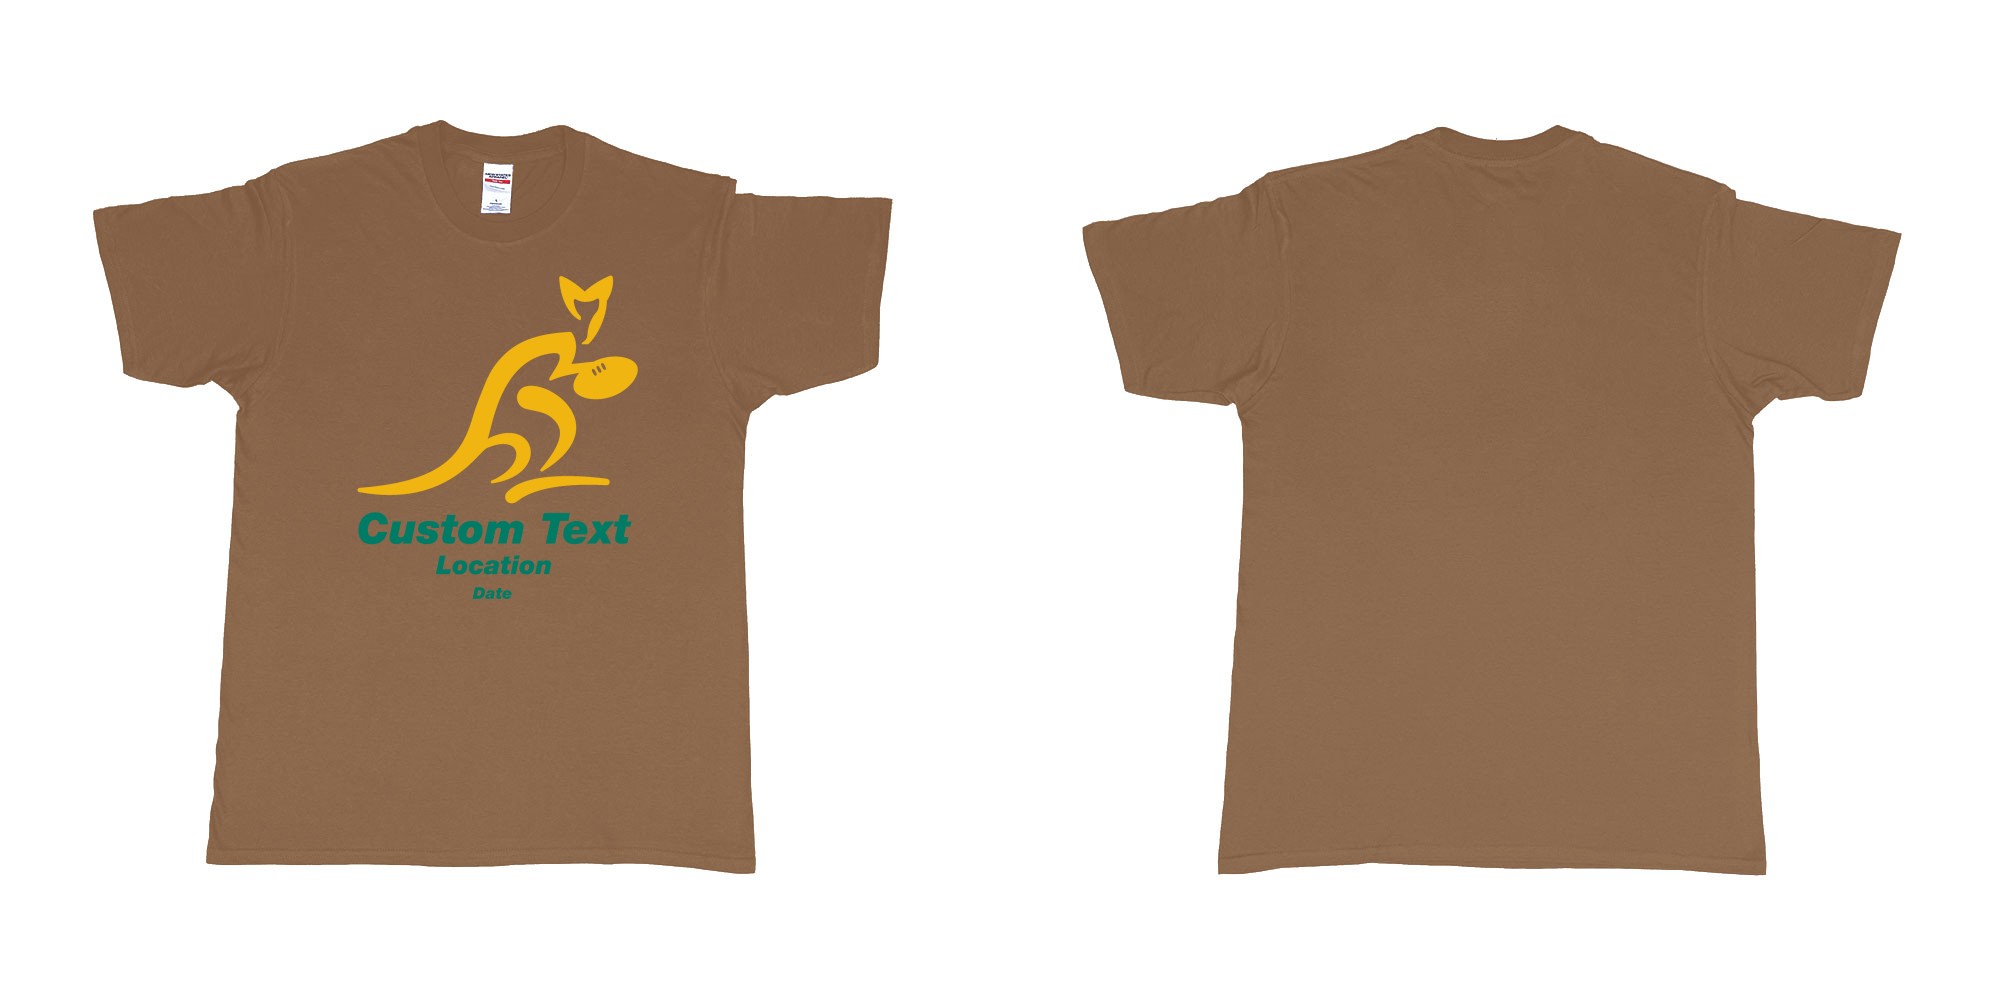 Custom tshirt design australia national rugby union team the wallabies in fabric color chestnut choice your own text made in Bali by The Pirate Way